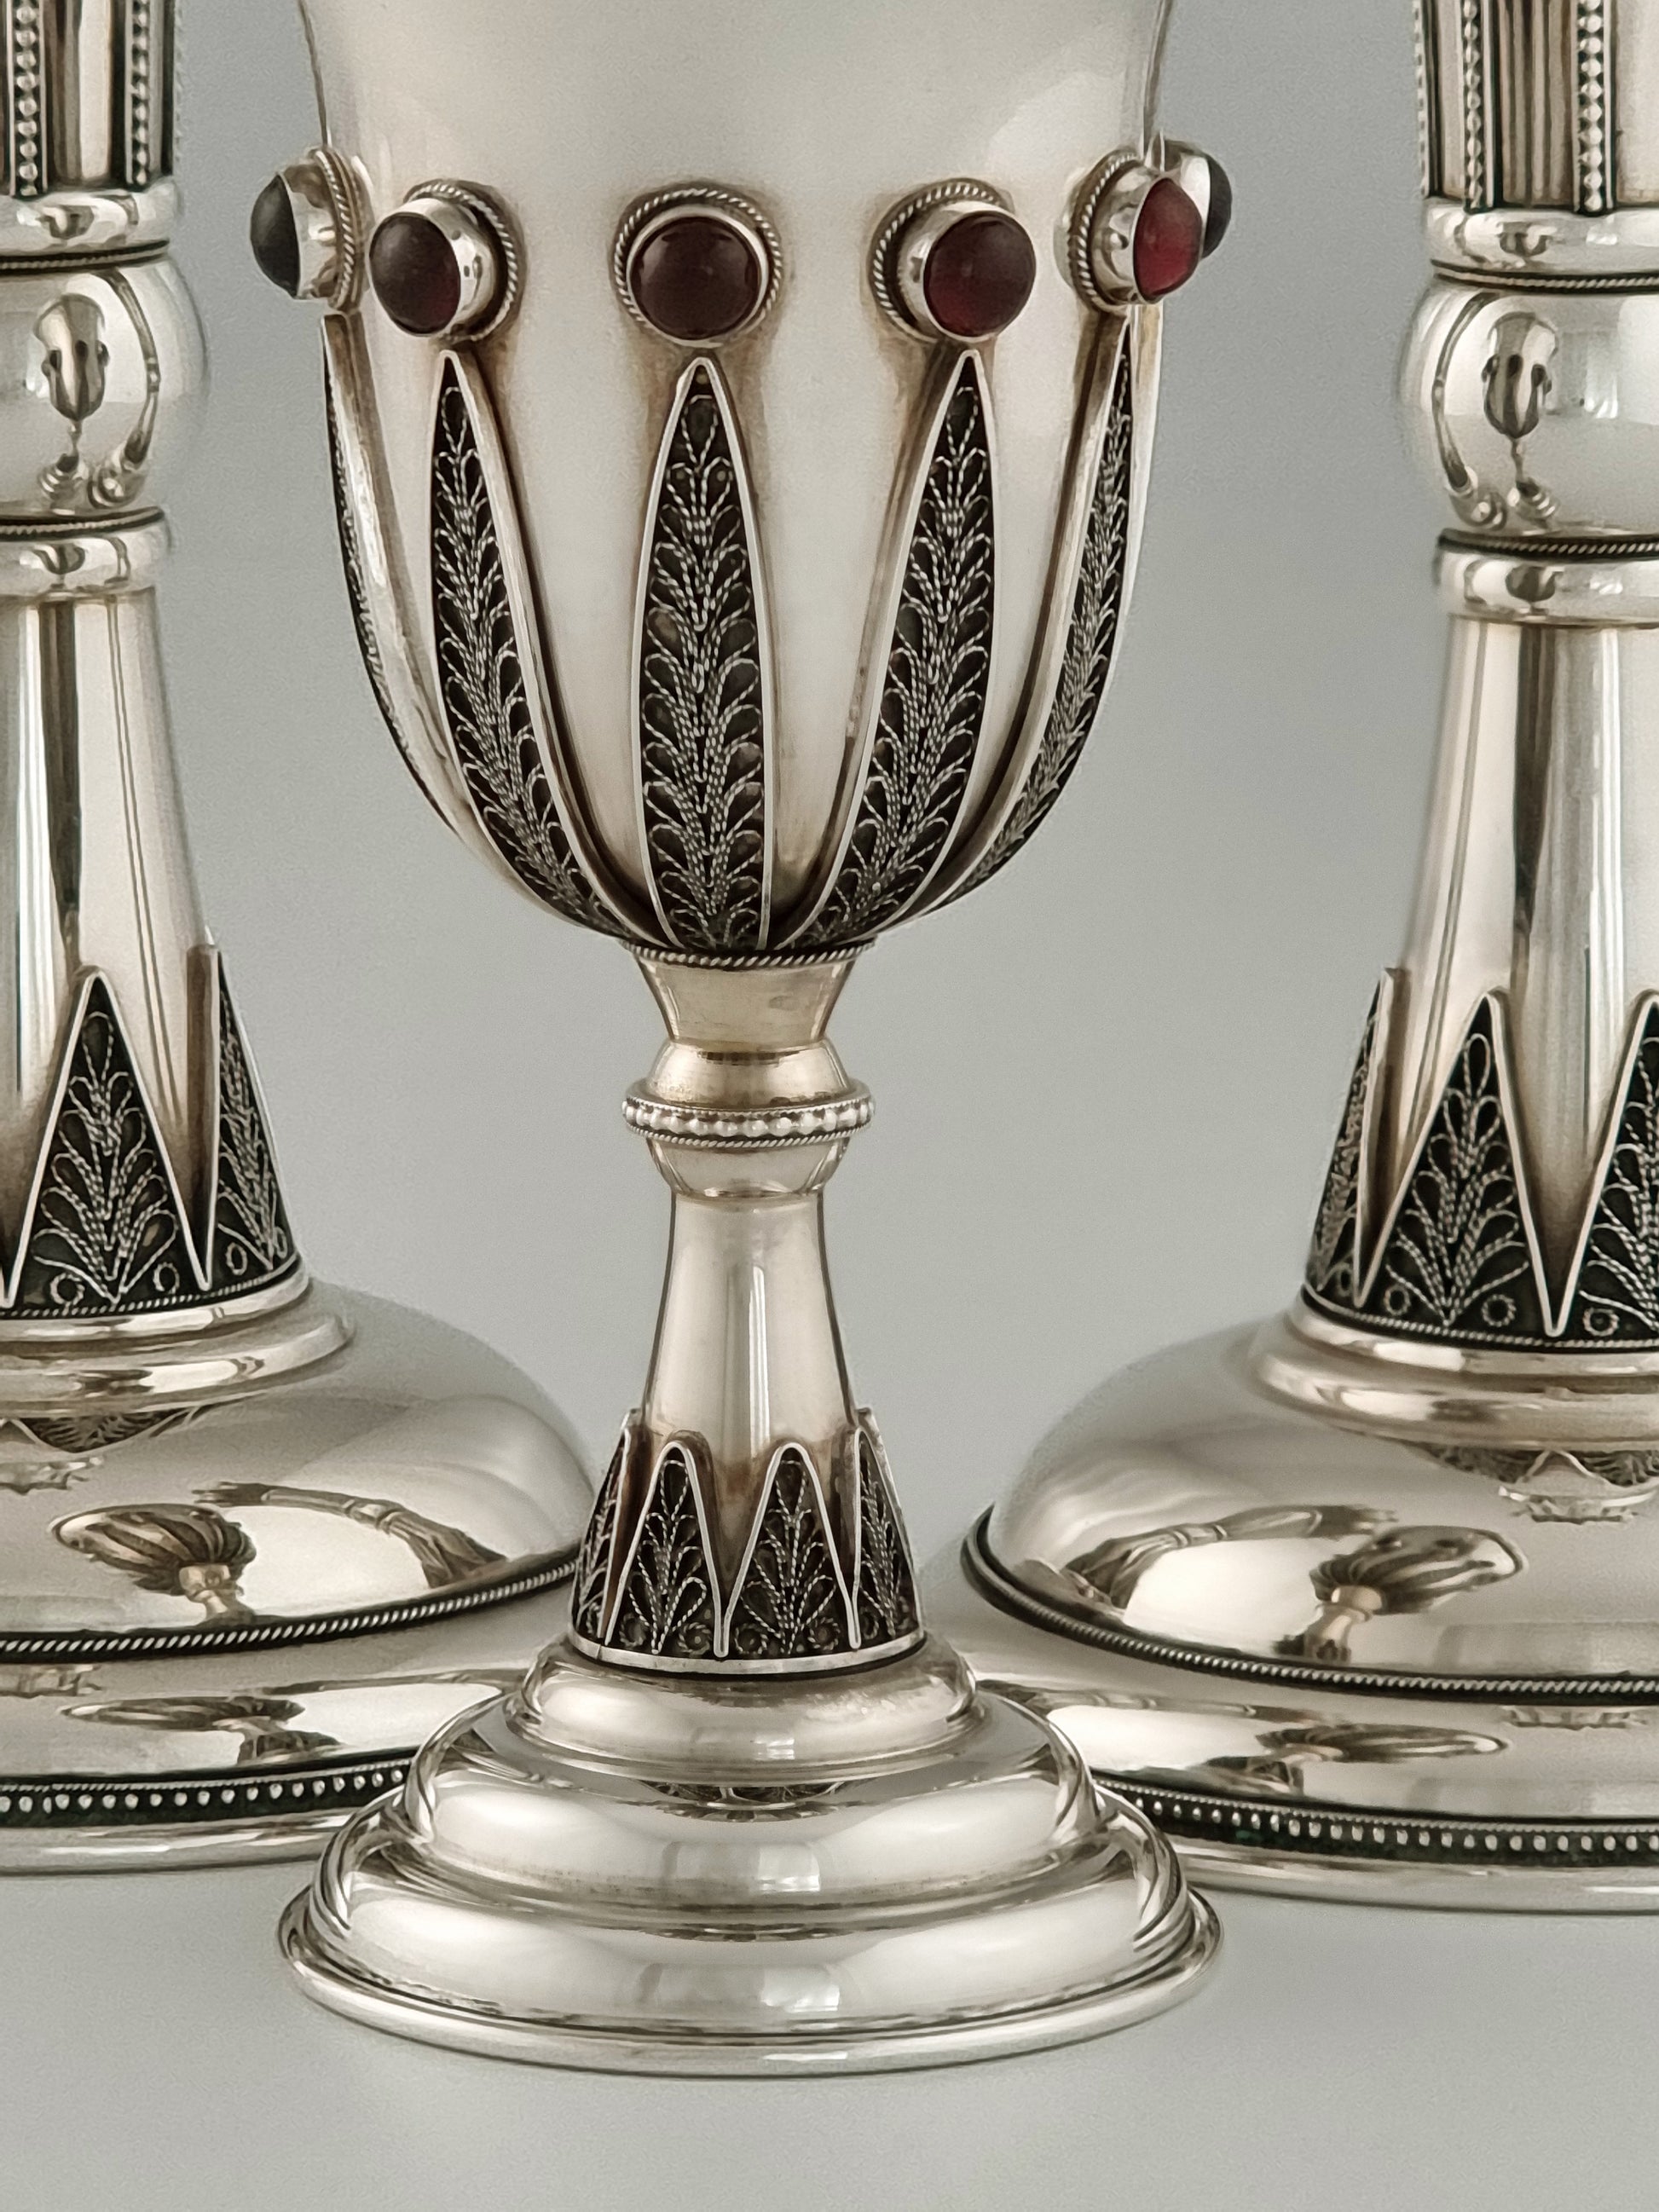 Jacob Kiddush Set.  It is made of sterling silver, gold-plated silver and garnet stones; ten on the cup and seven on each candlestick. The cup is 5½" high and the candlesticks are 10” high.